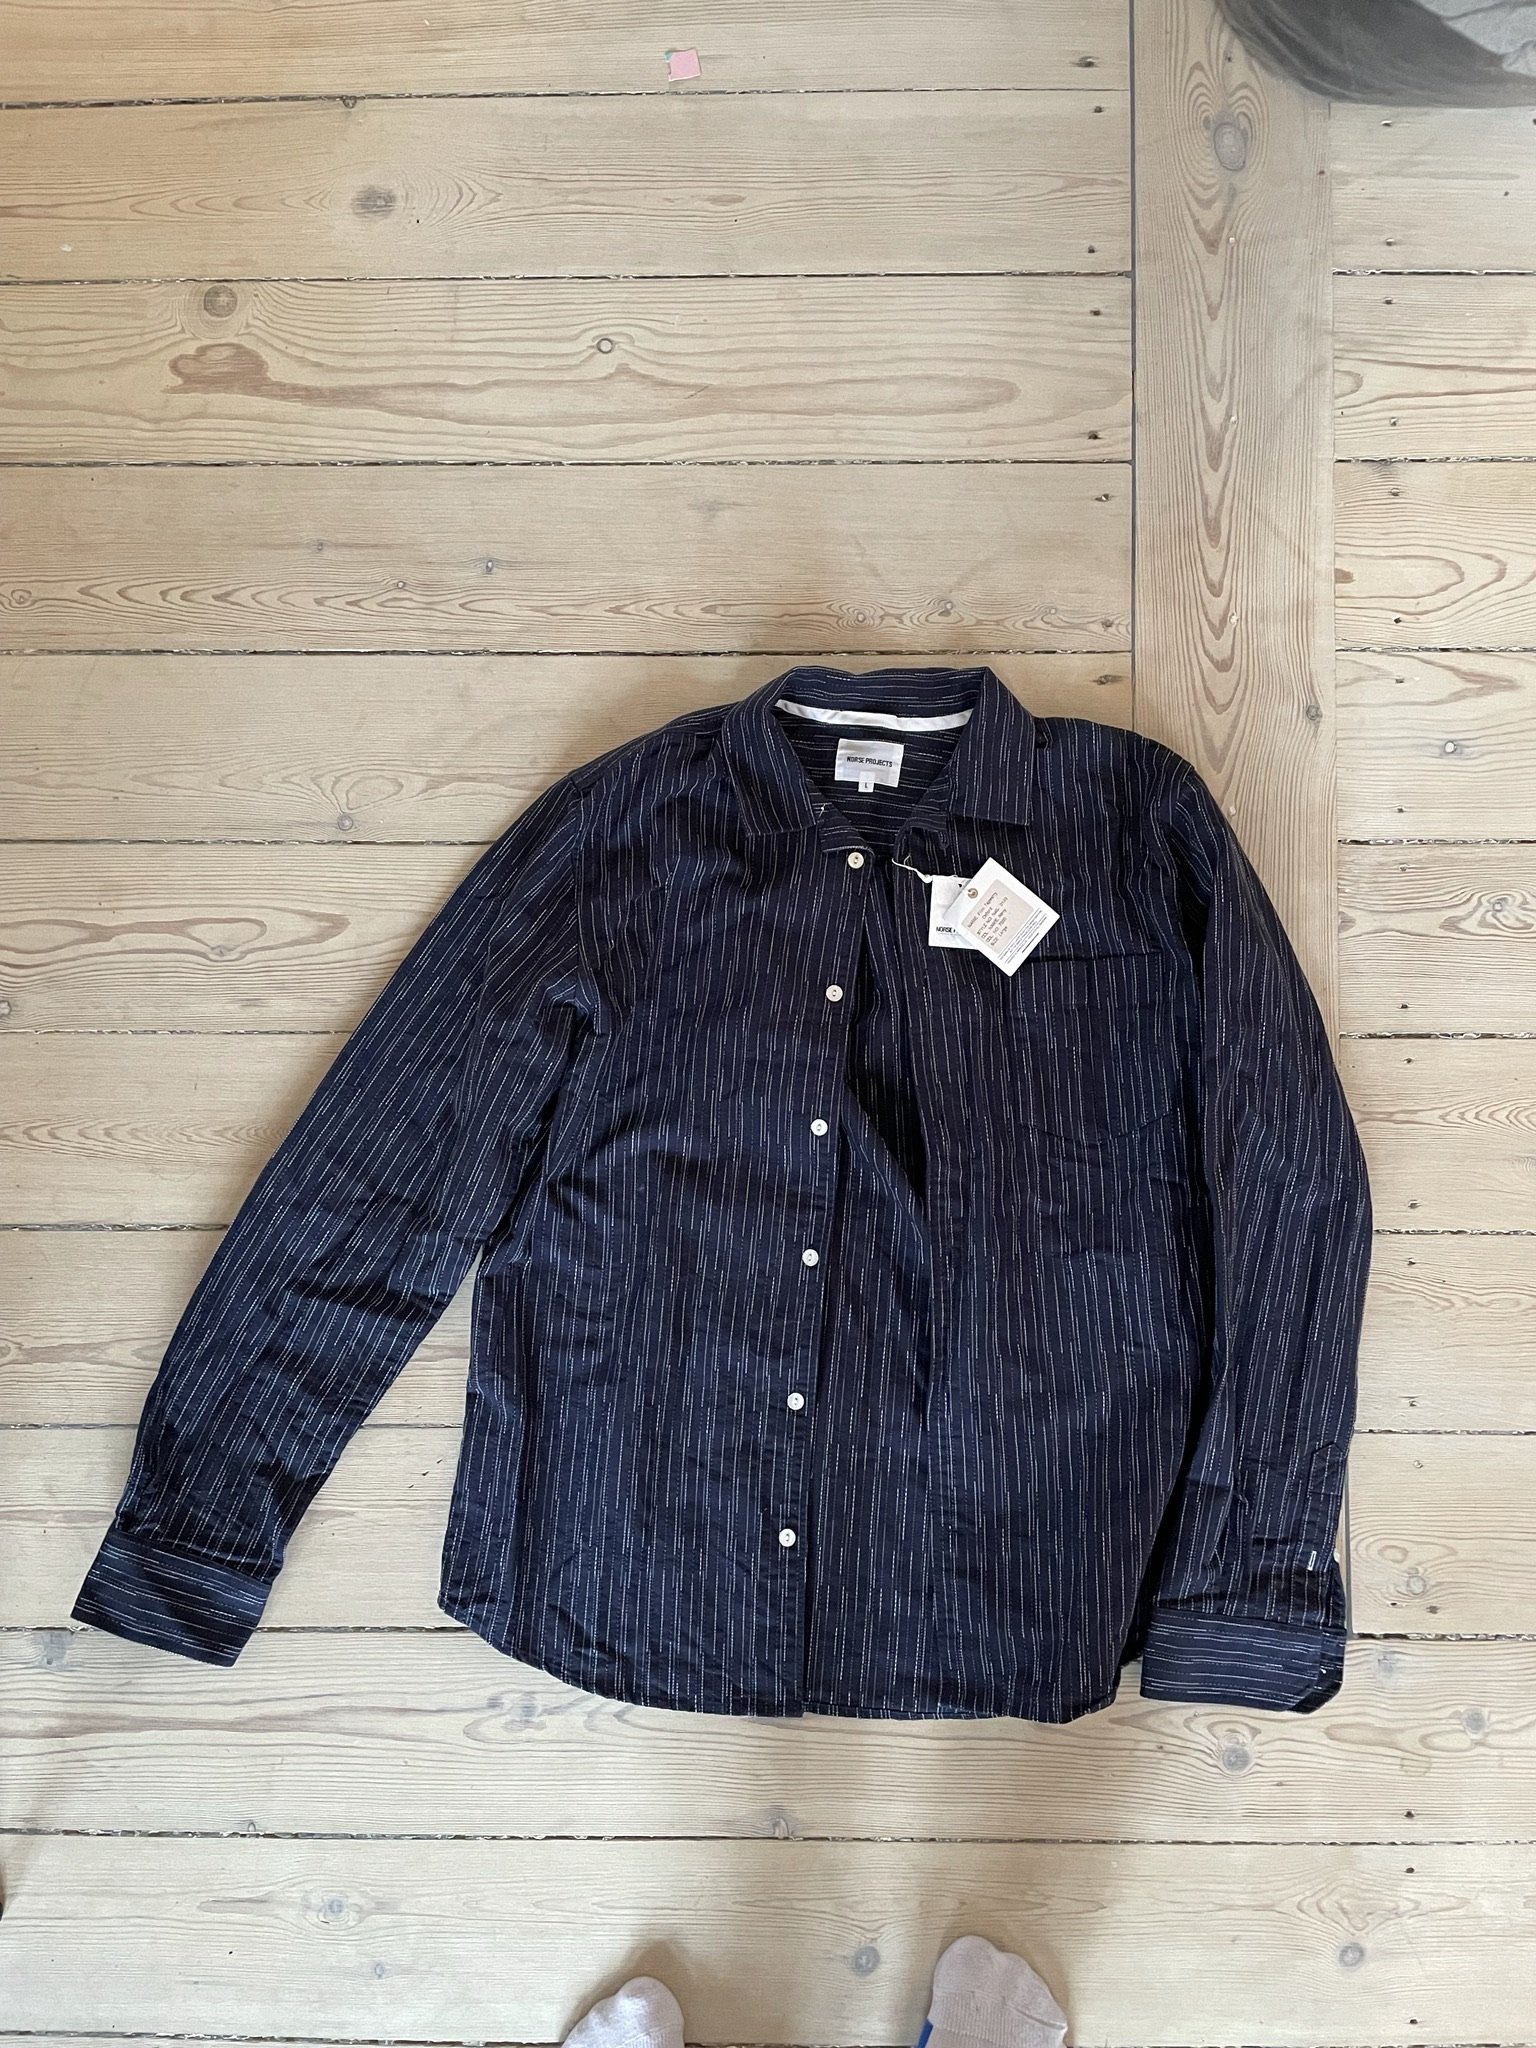 Norse Projects skjorte, 600 kr. 